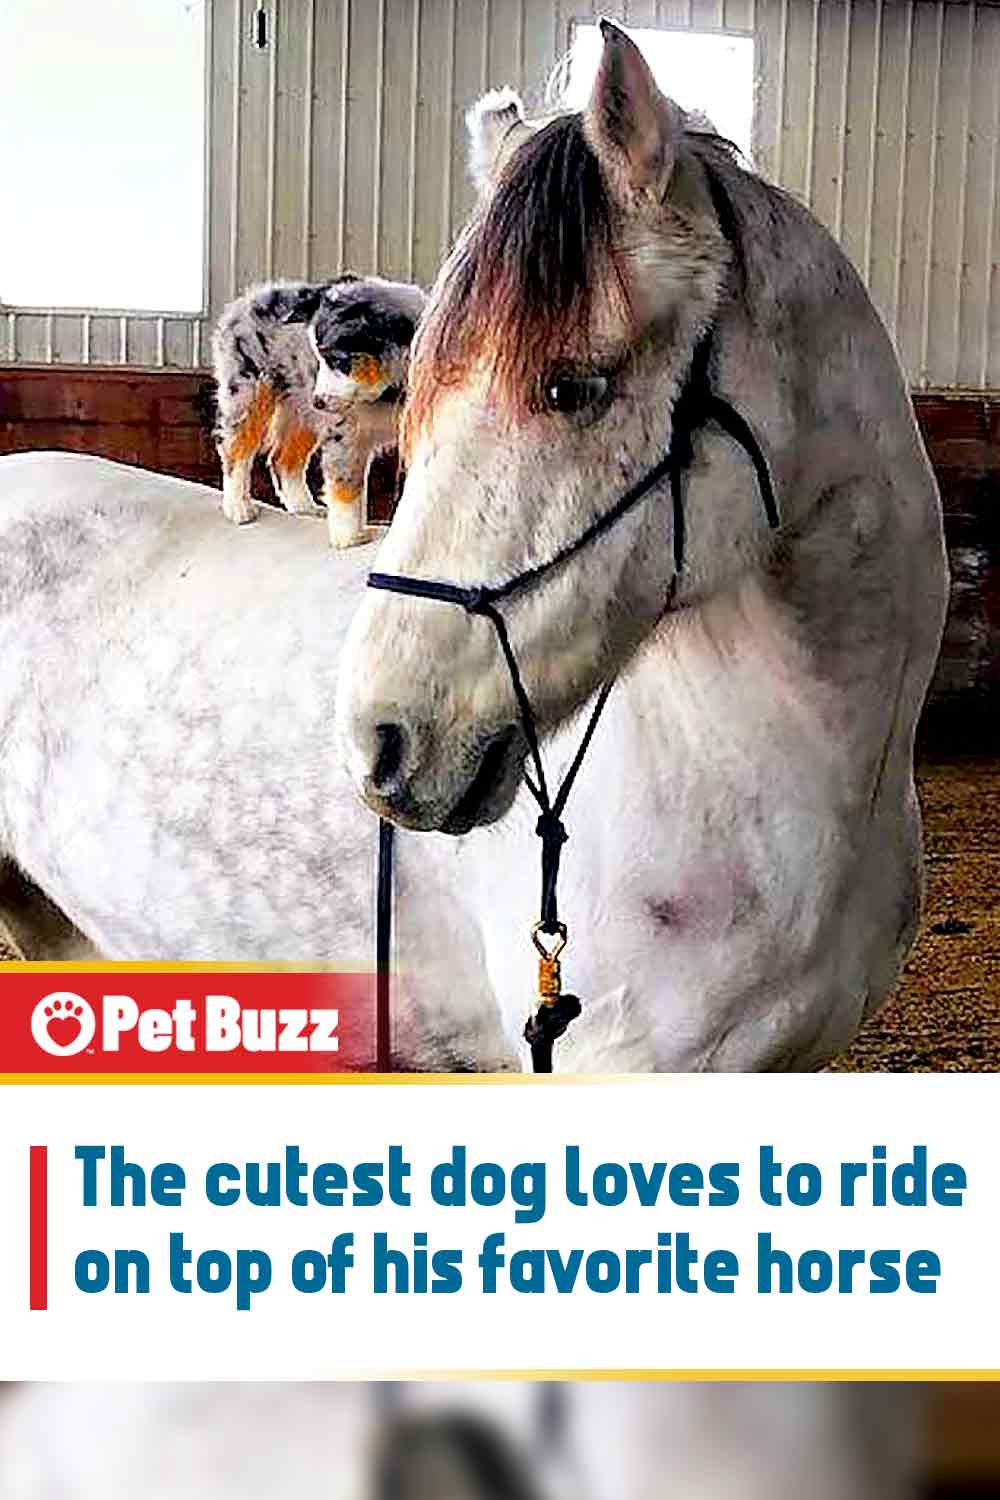 The cutest dog loves to ride on top of his favorite horse